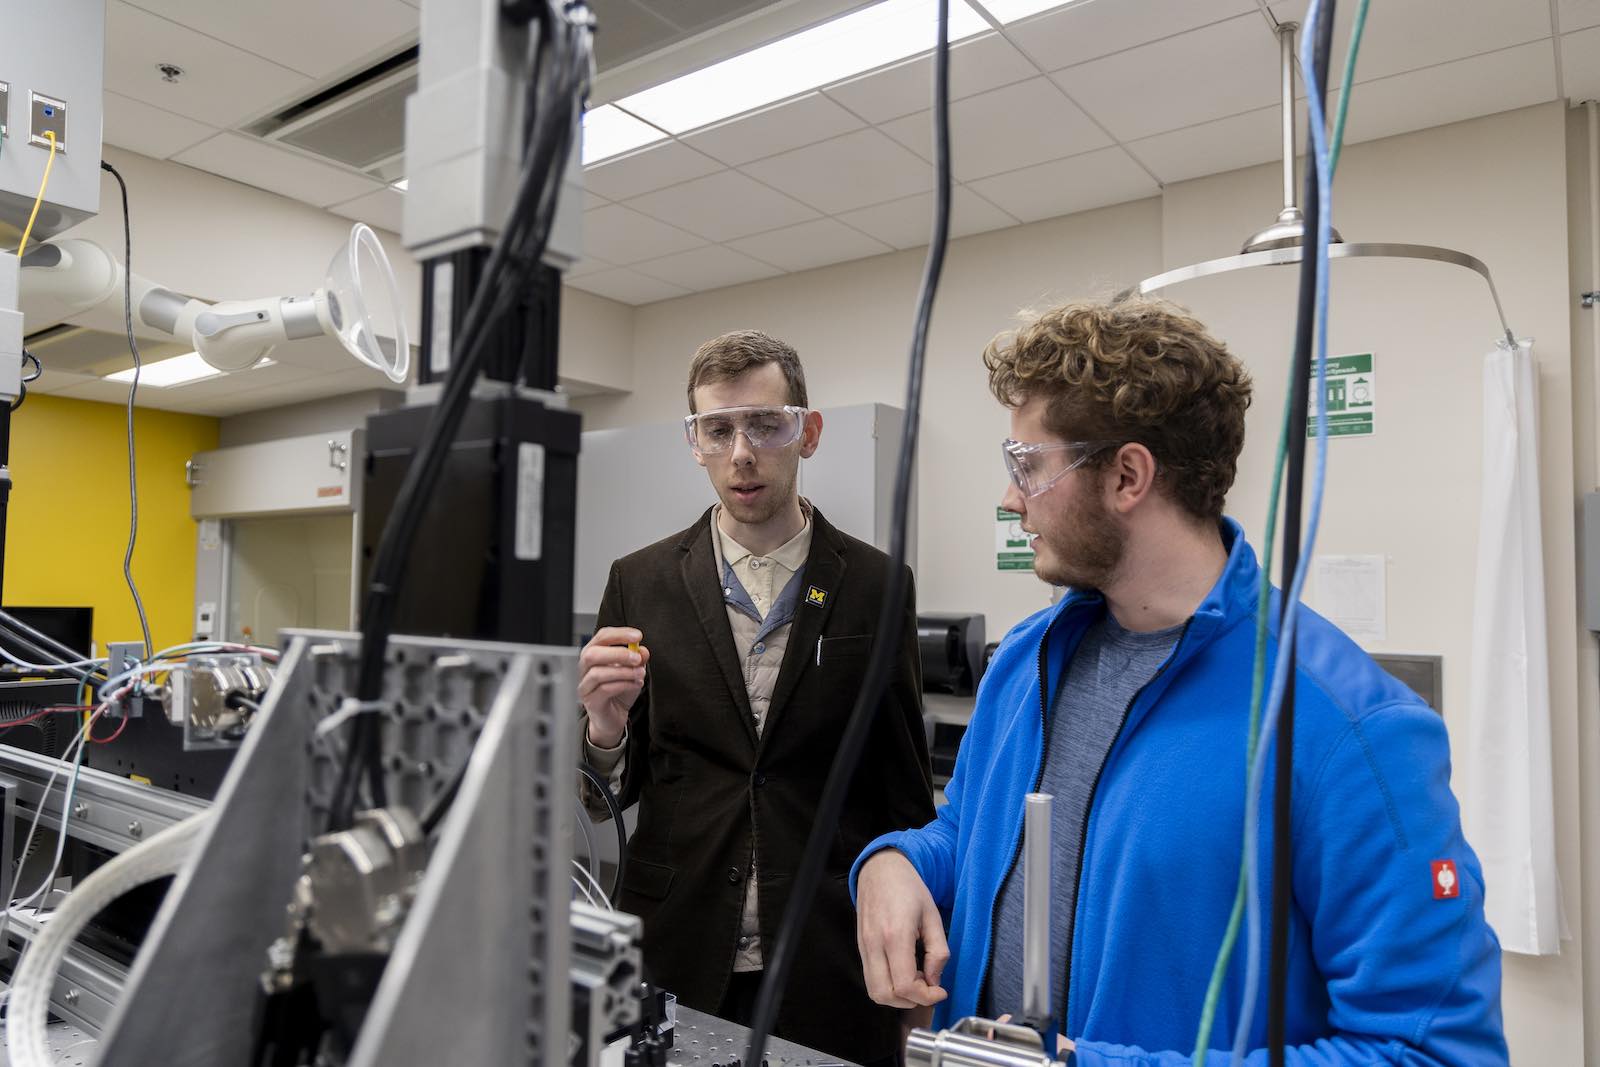 Mohanty's interdisciplinary team includes six other UM-Dearborn faculty and multiple graduate students, including Assistant Professor of Mechanical Engineering Chris Pannier (left) and graduate student Maximilian Ullrich. Photo by Emily Barrett-Adkins